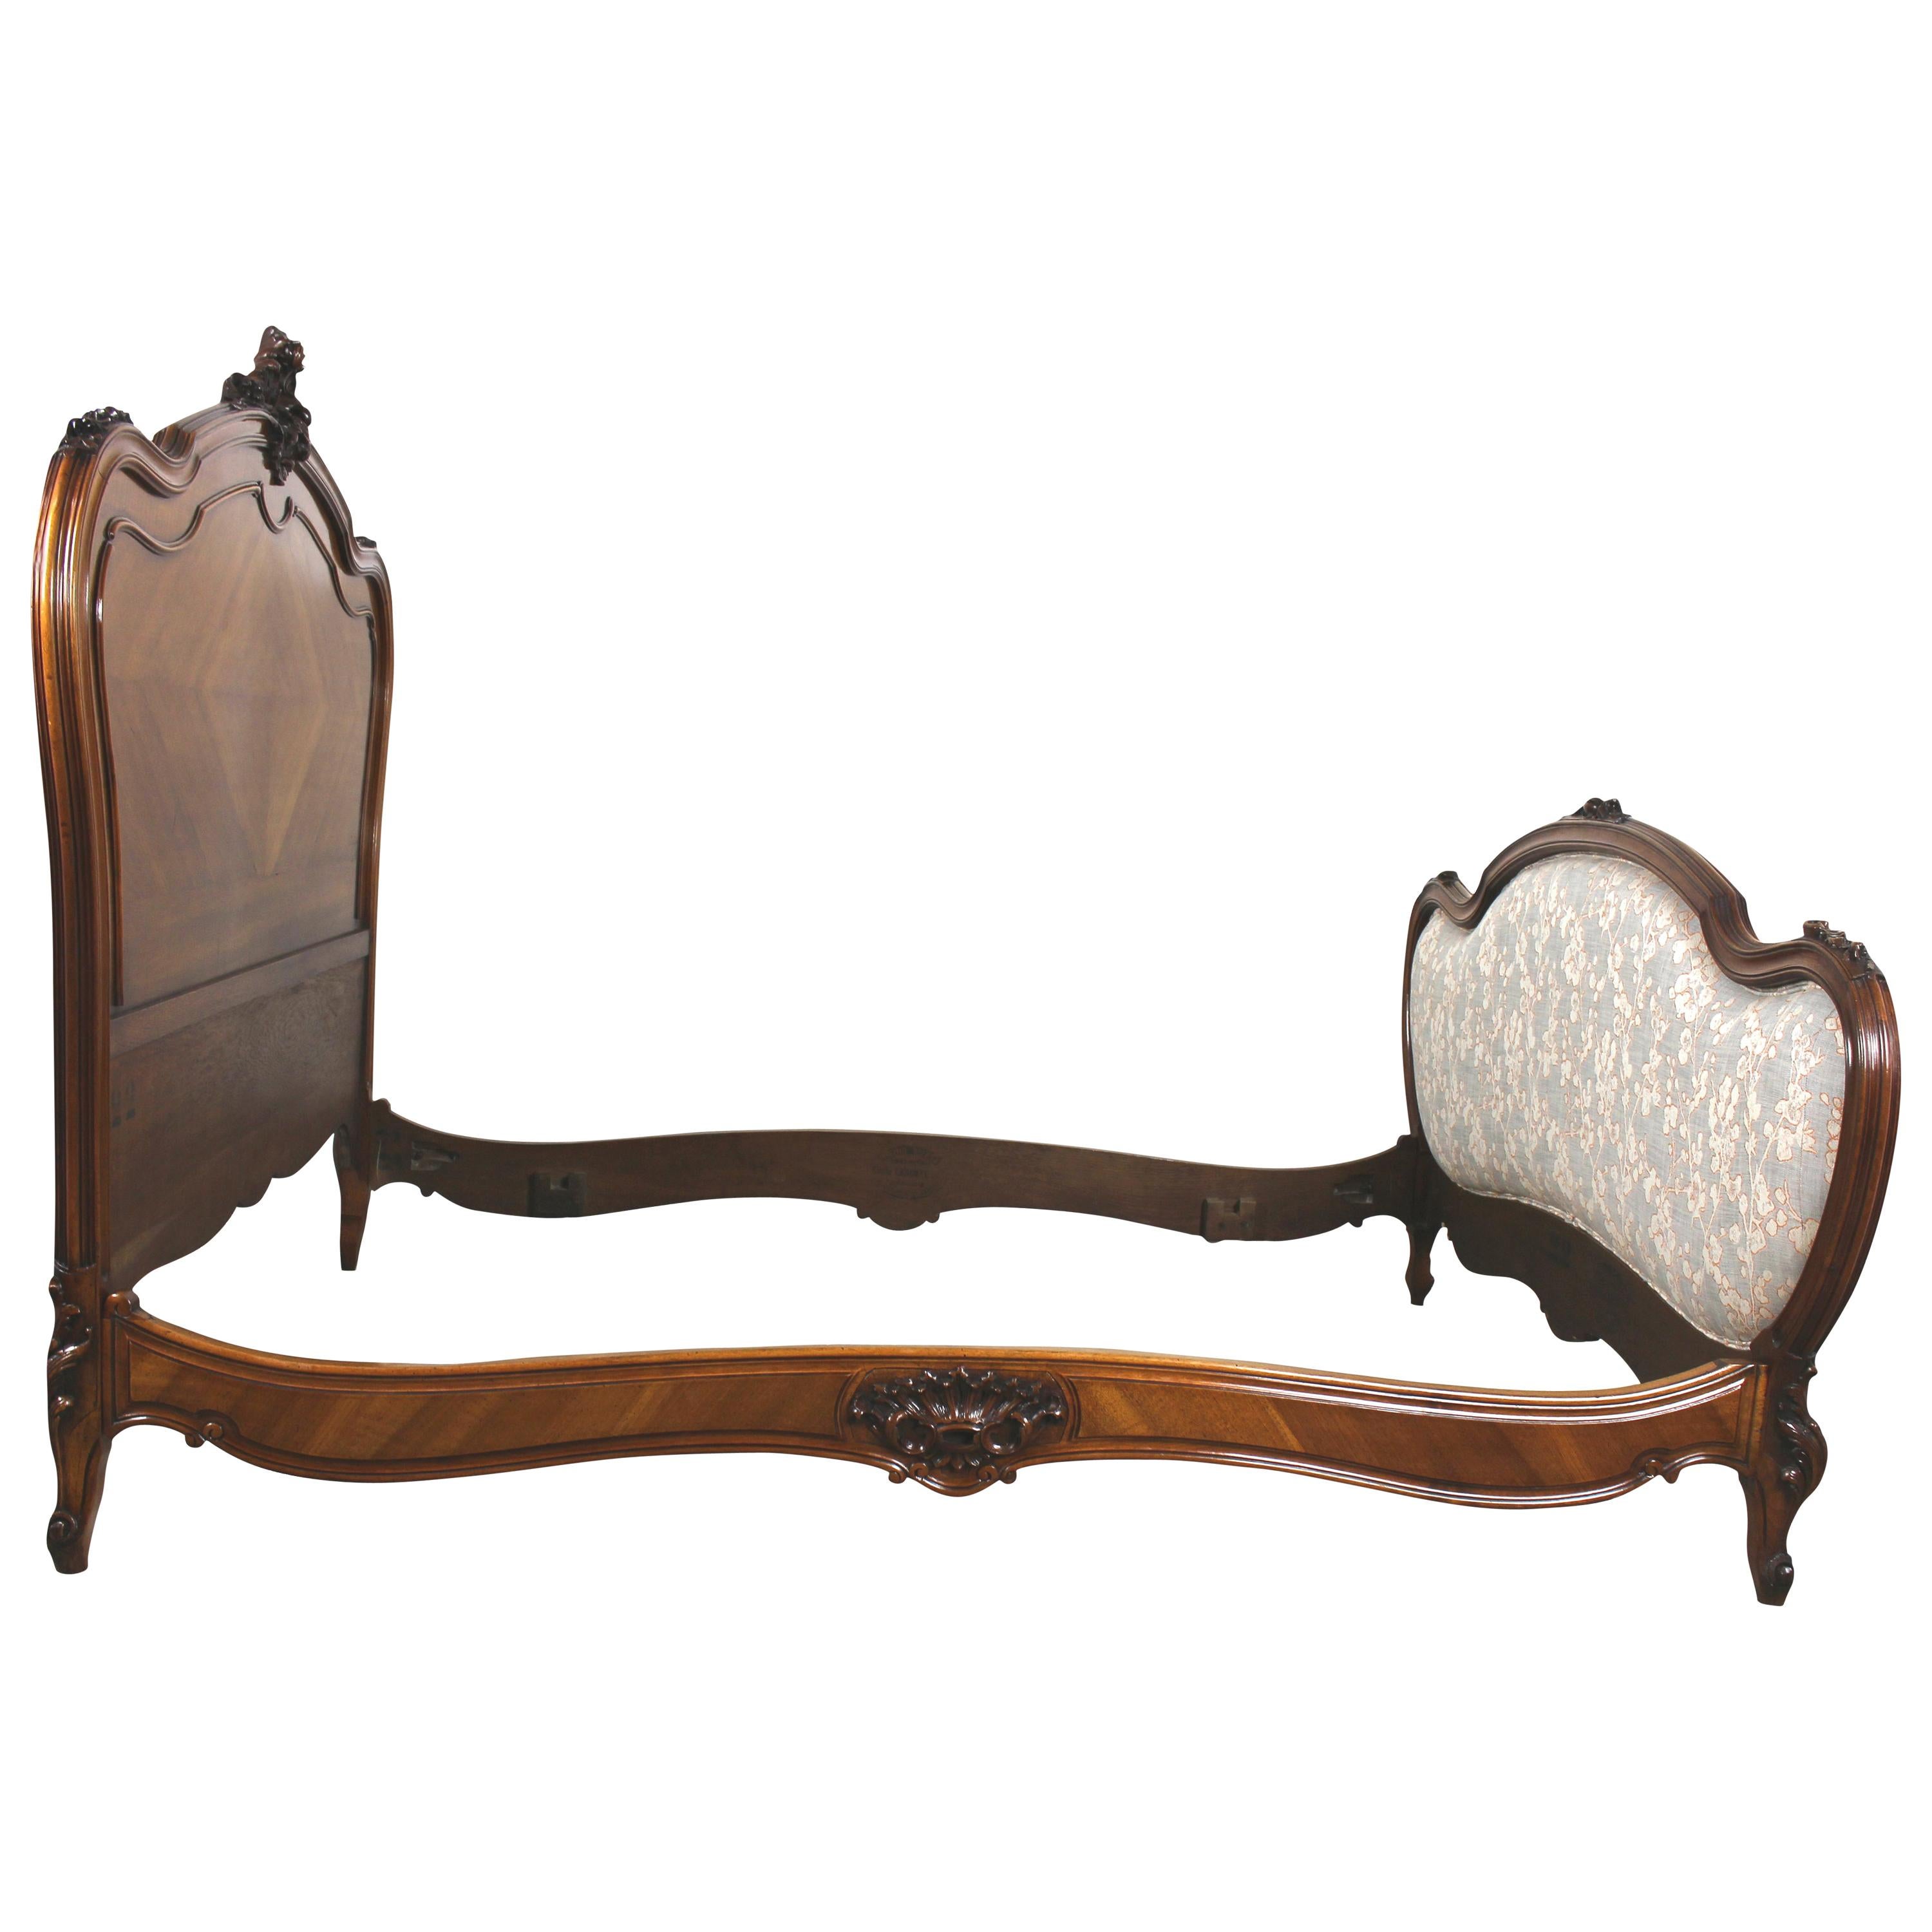 19th Century French Carved Walnut Framed Bed For Sale